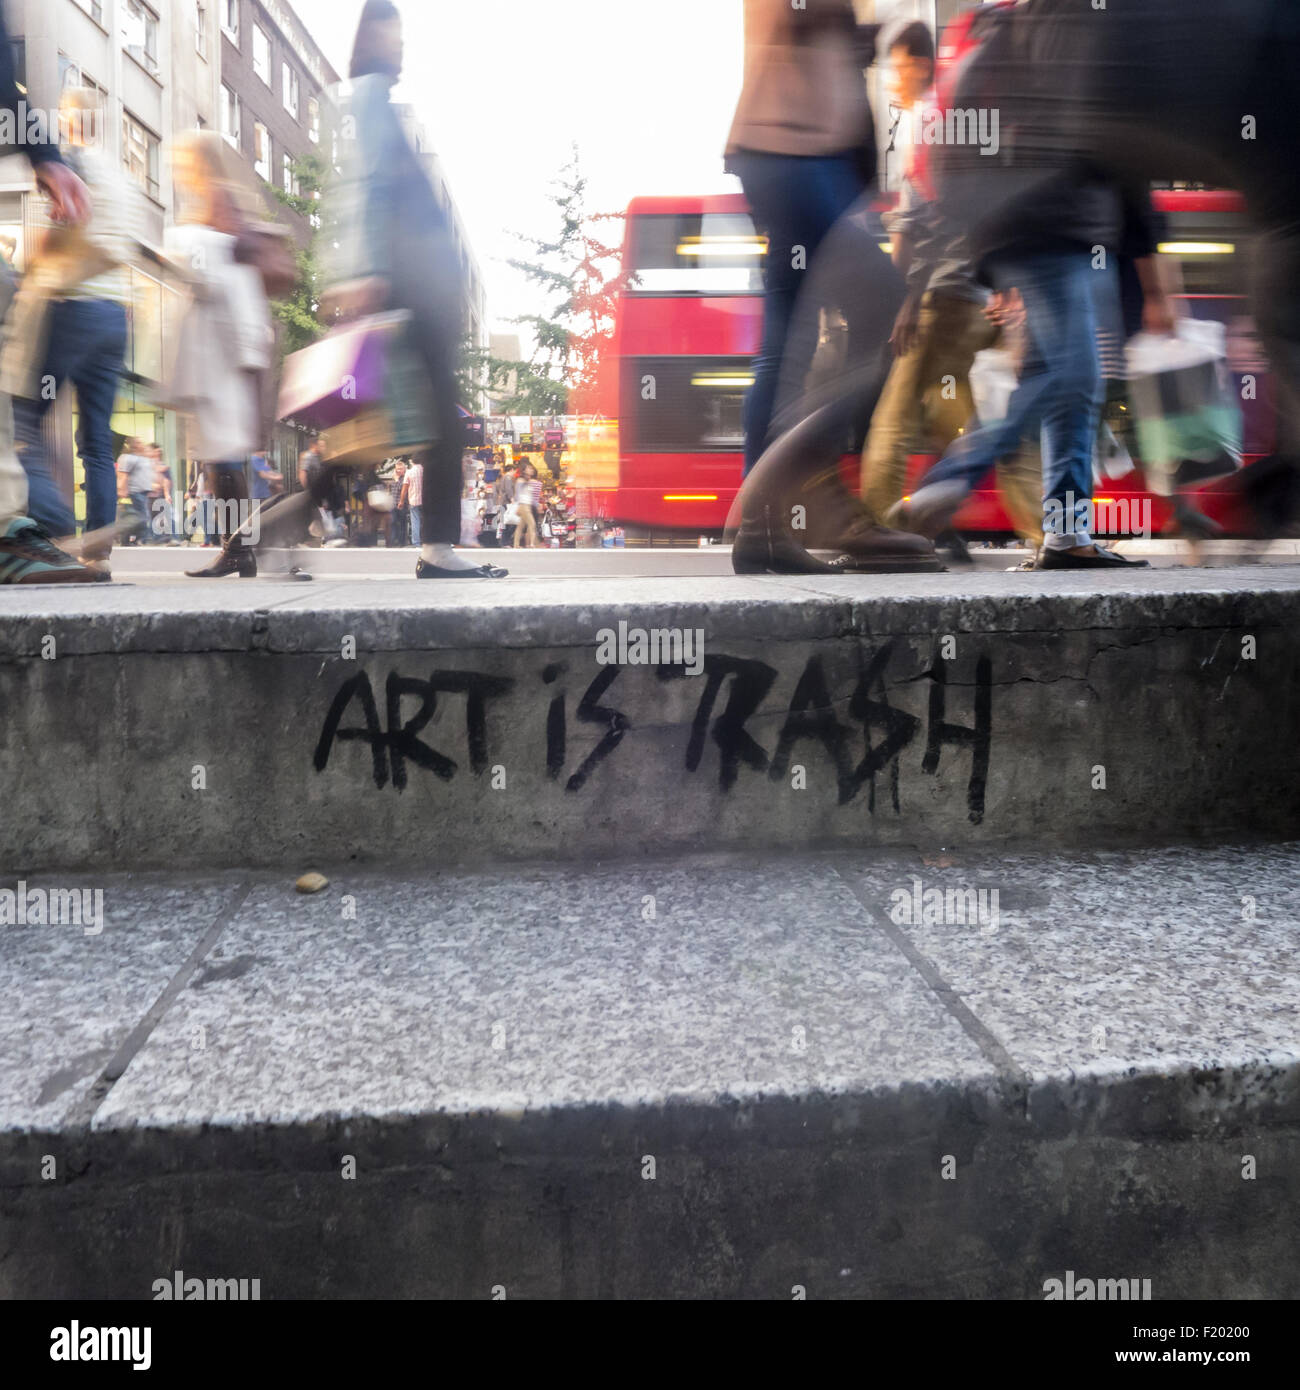 London, England. Street kerb with 'Art is Trash' graffiti, with pedestrian feet, in blue trainers and polished leather. Stock Photo